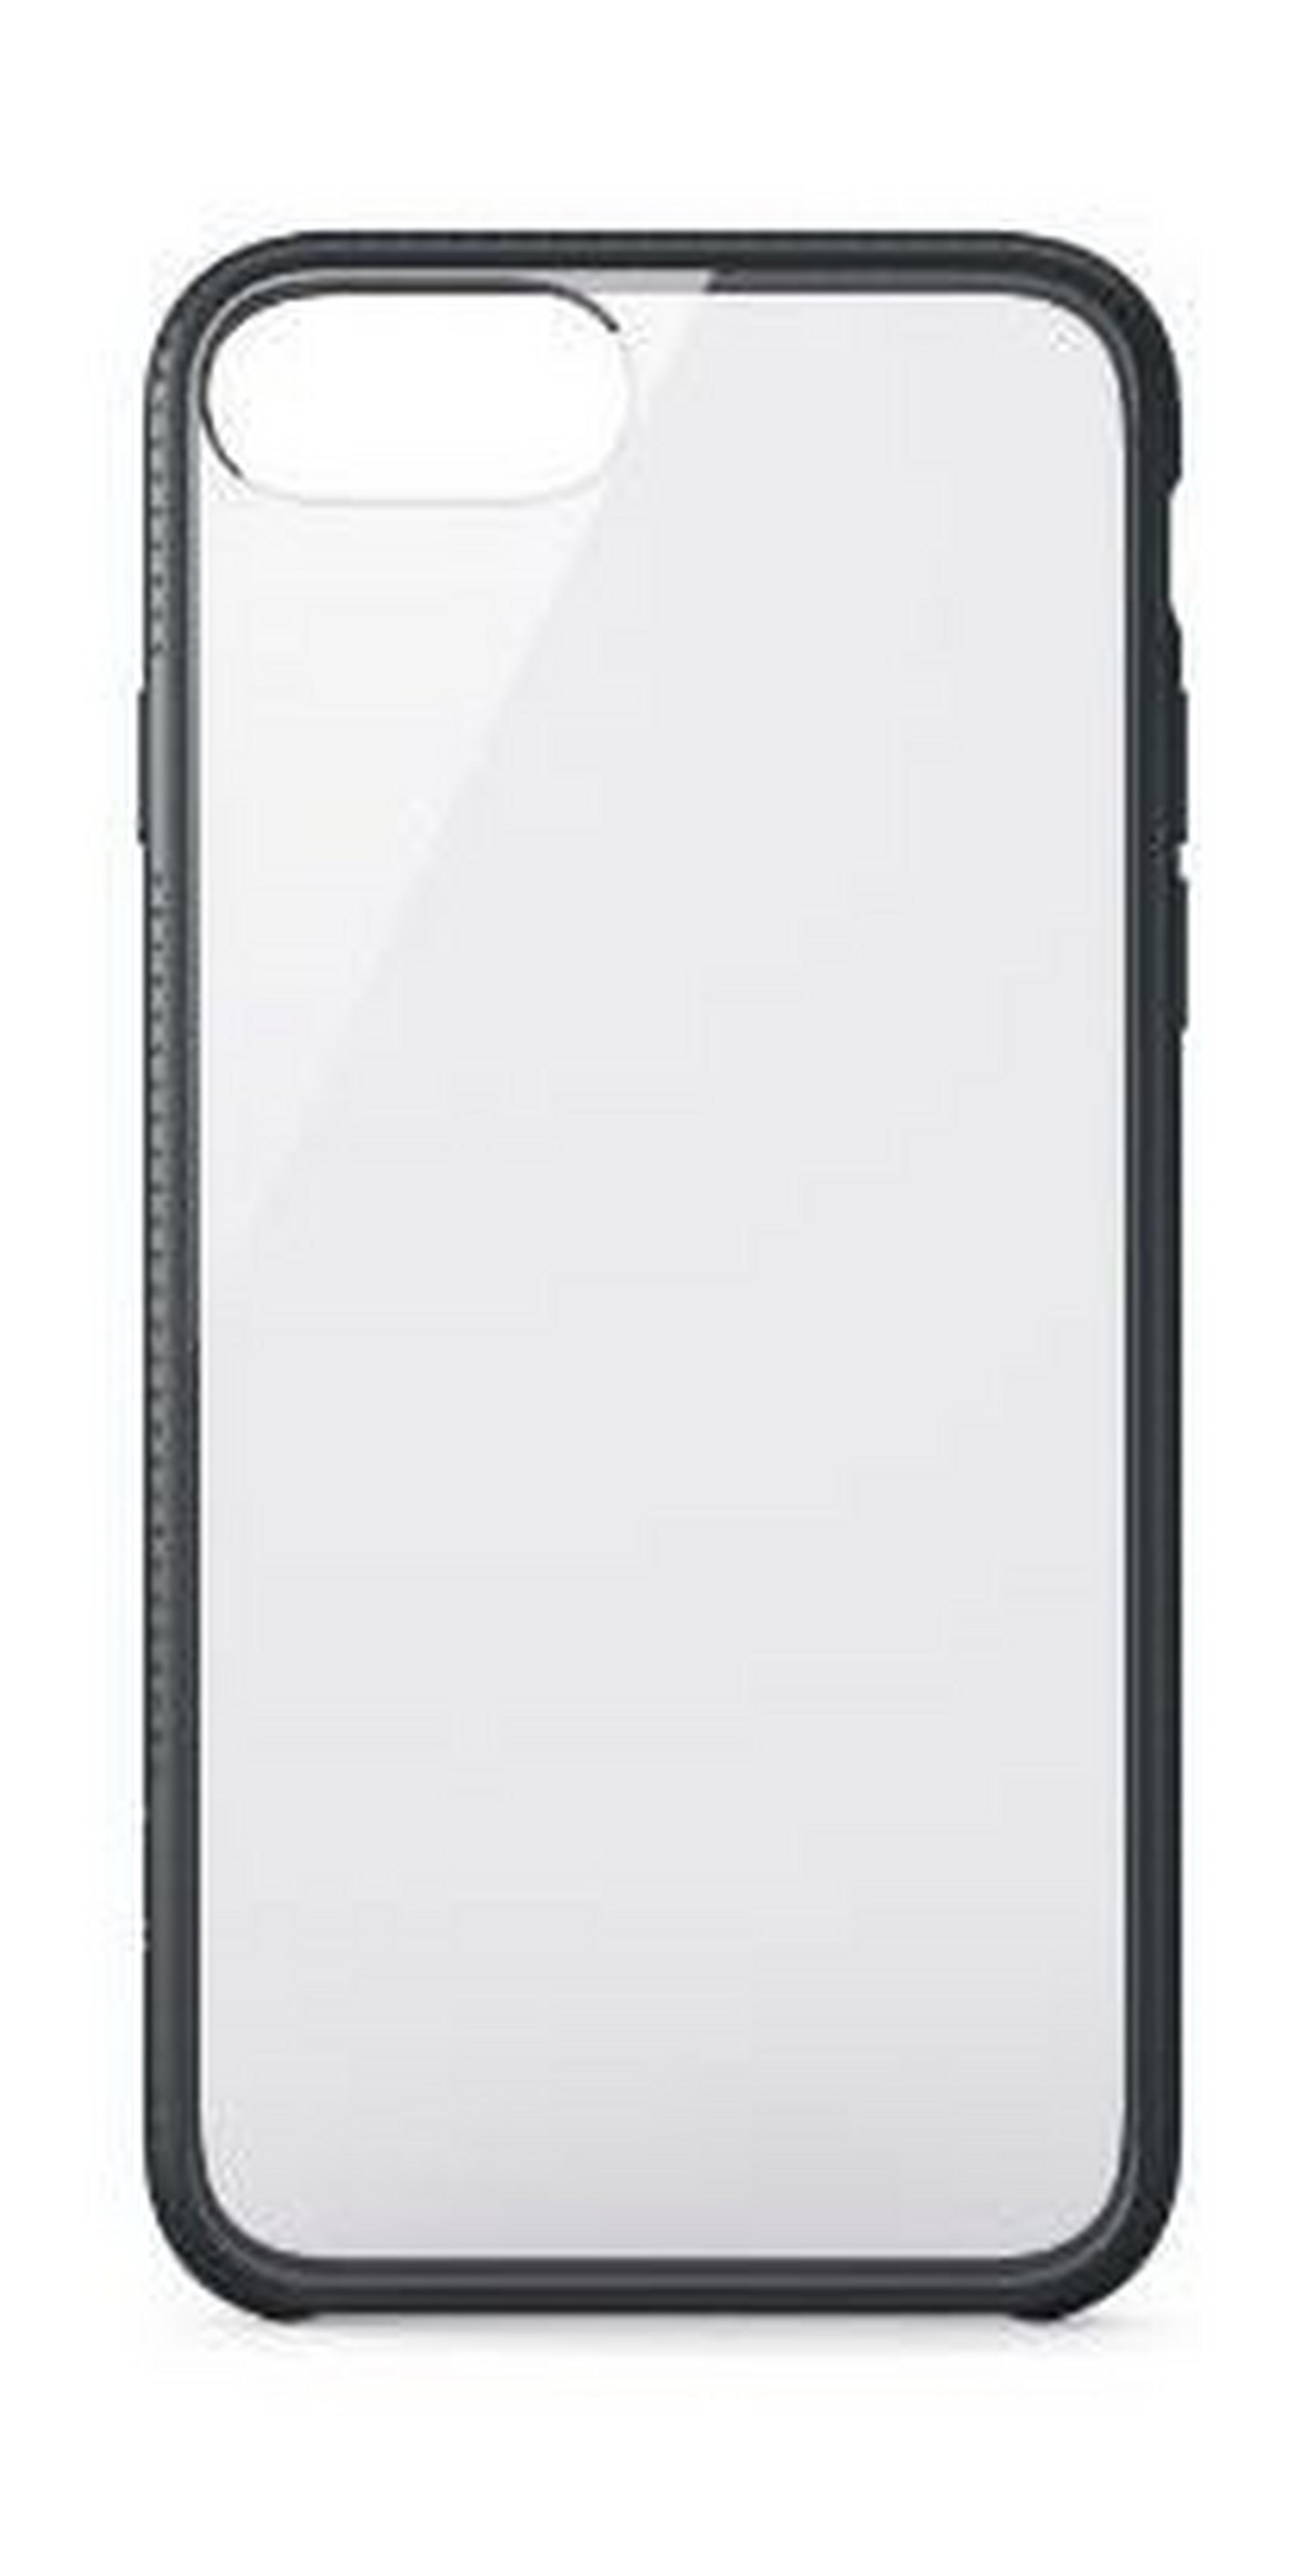 Belkin Air Protect SheerForce Case For iPhone 7 Plus (F8W809BTC04) - Matte Black